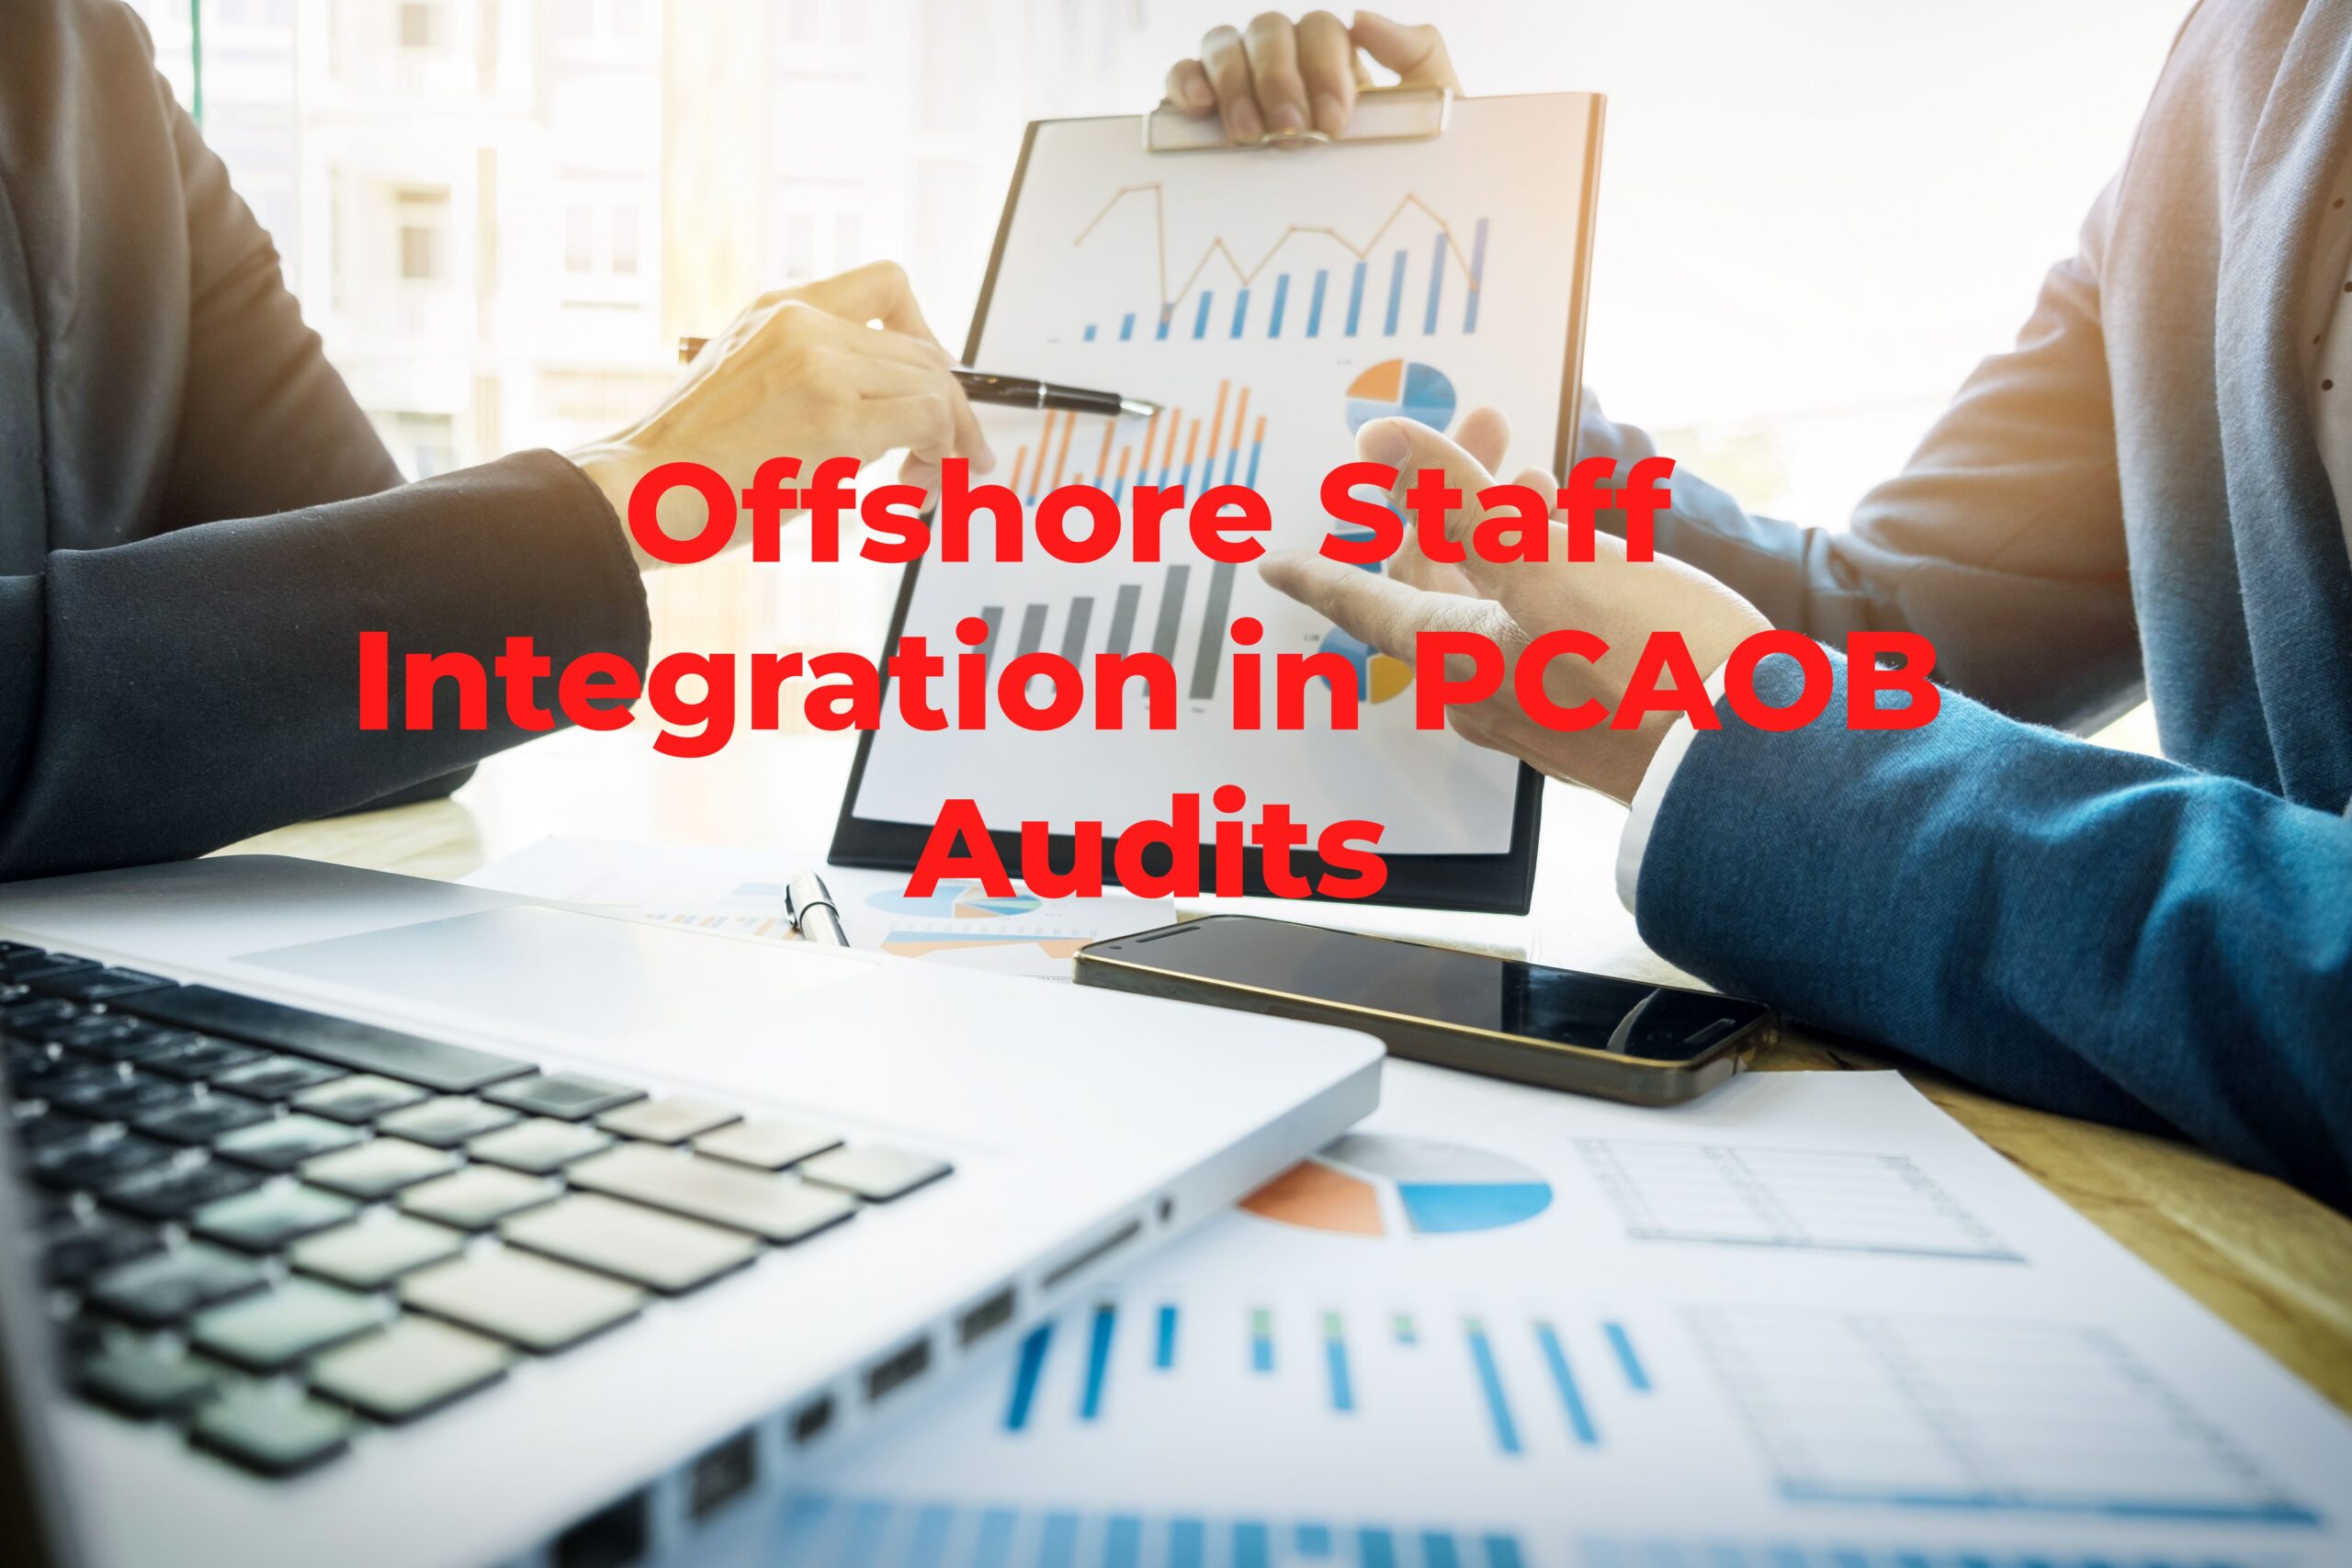 Navigating Offshore Staff Integration in PCAOB Audits: Considerations and Best Practices